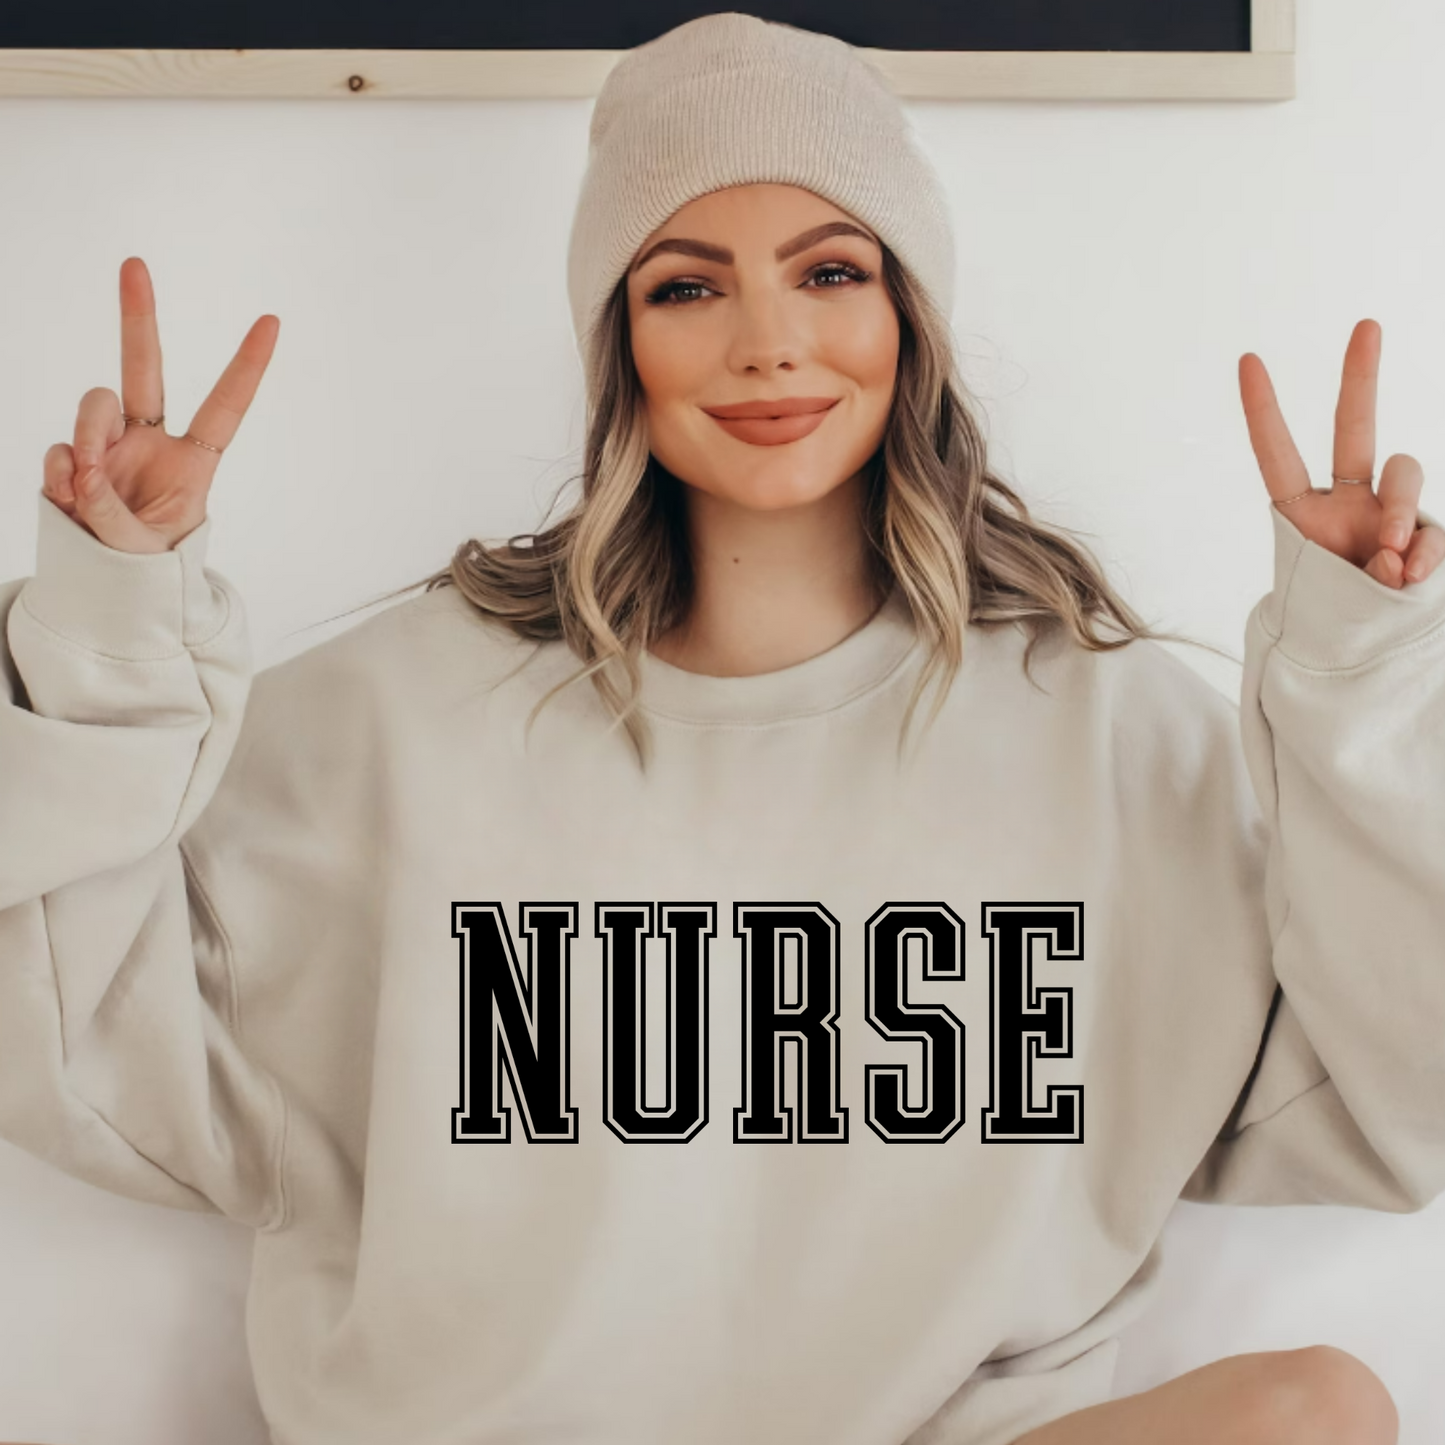 (Shirt not Included) NURSE  - CLEAR FILM Transfer